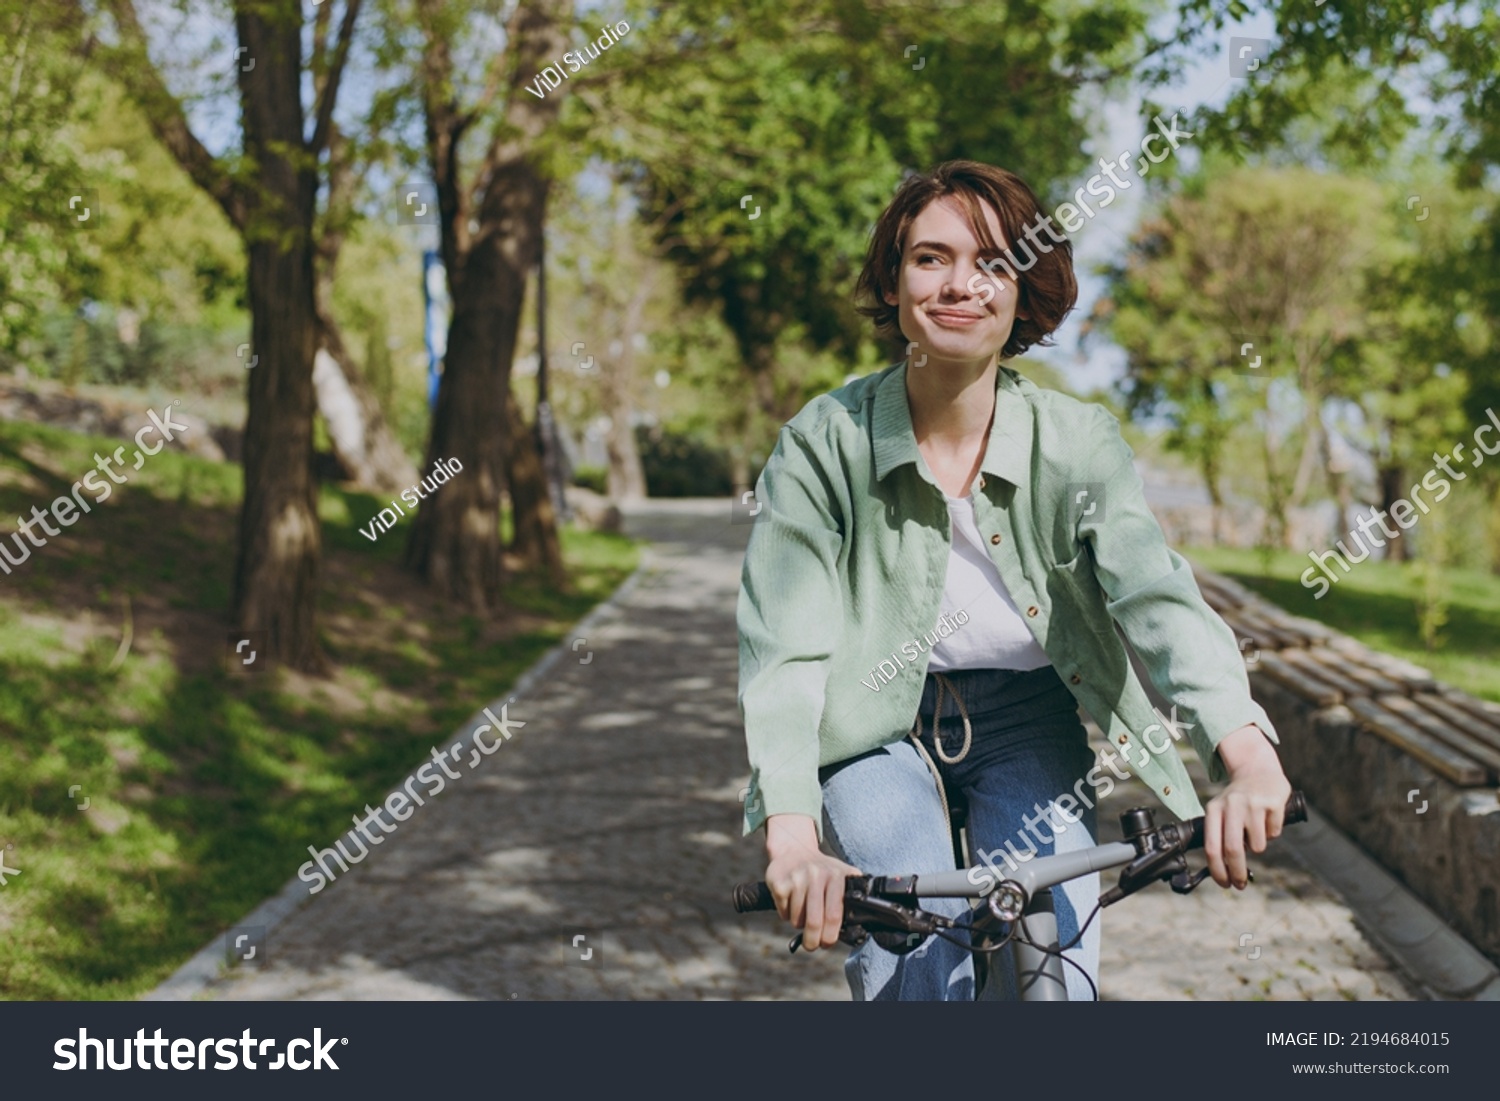 Young pensive dreamful happy woman 20s wearing casual green jacket jeans riding bicycle bike on sidewalk in city spring park outdoors, look aside. People active urban healthy lifestyle cycling concept #2194684015